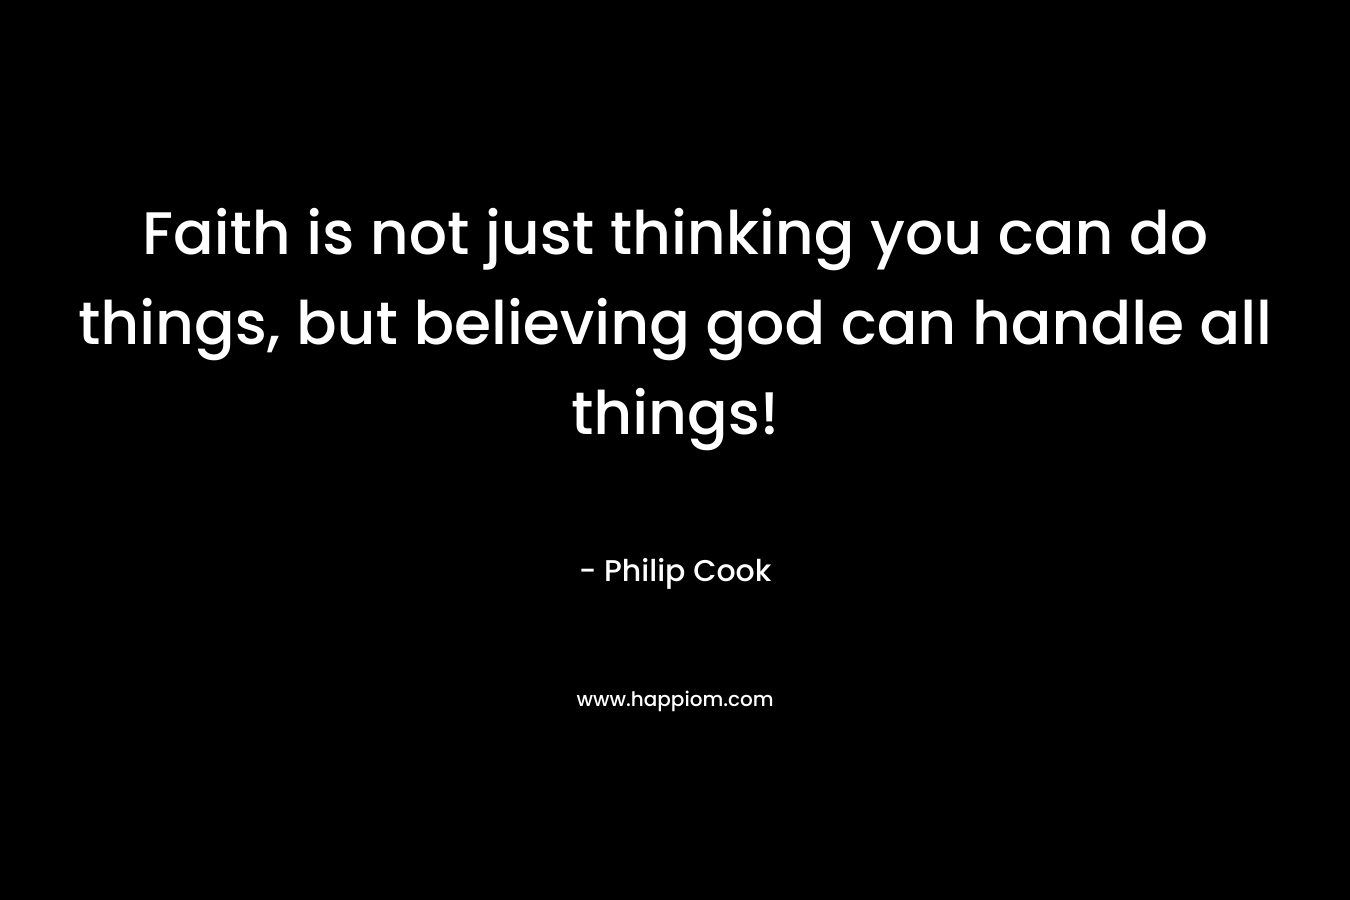 Faith is not just thinking you can do things, but believing god can handle all things!